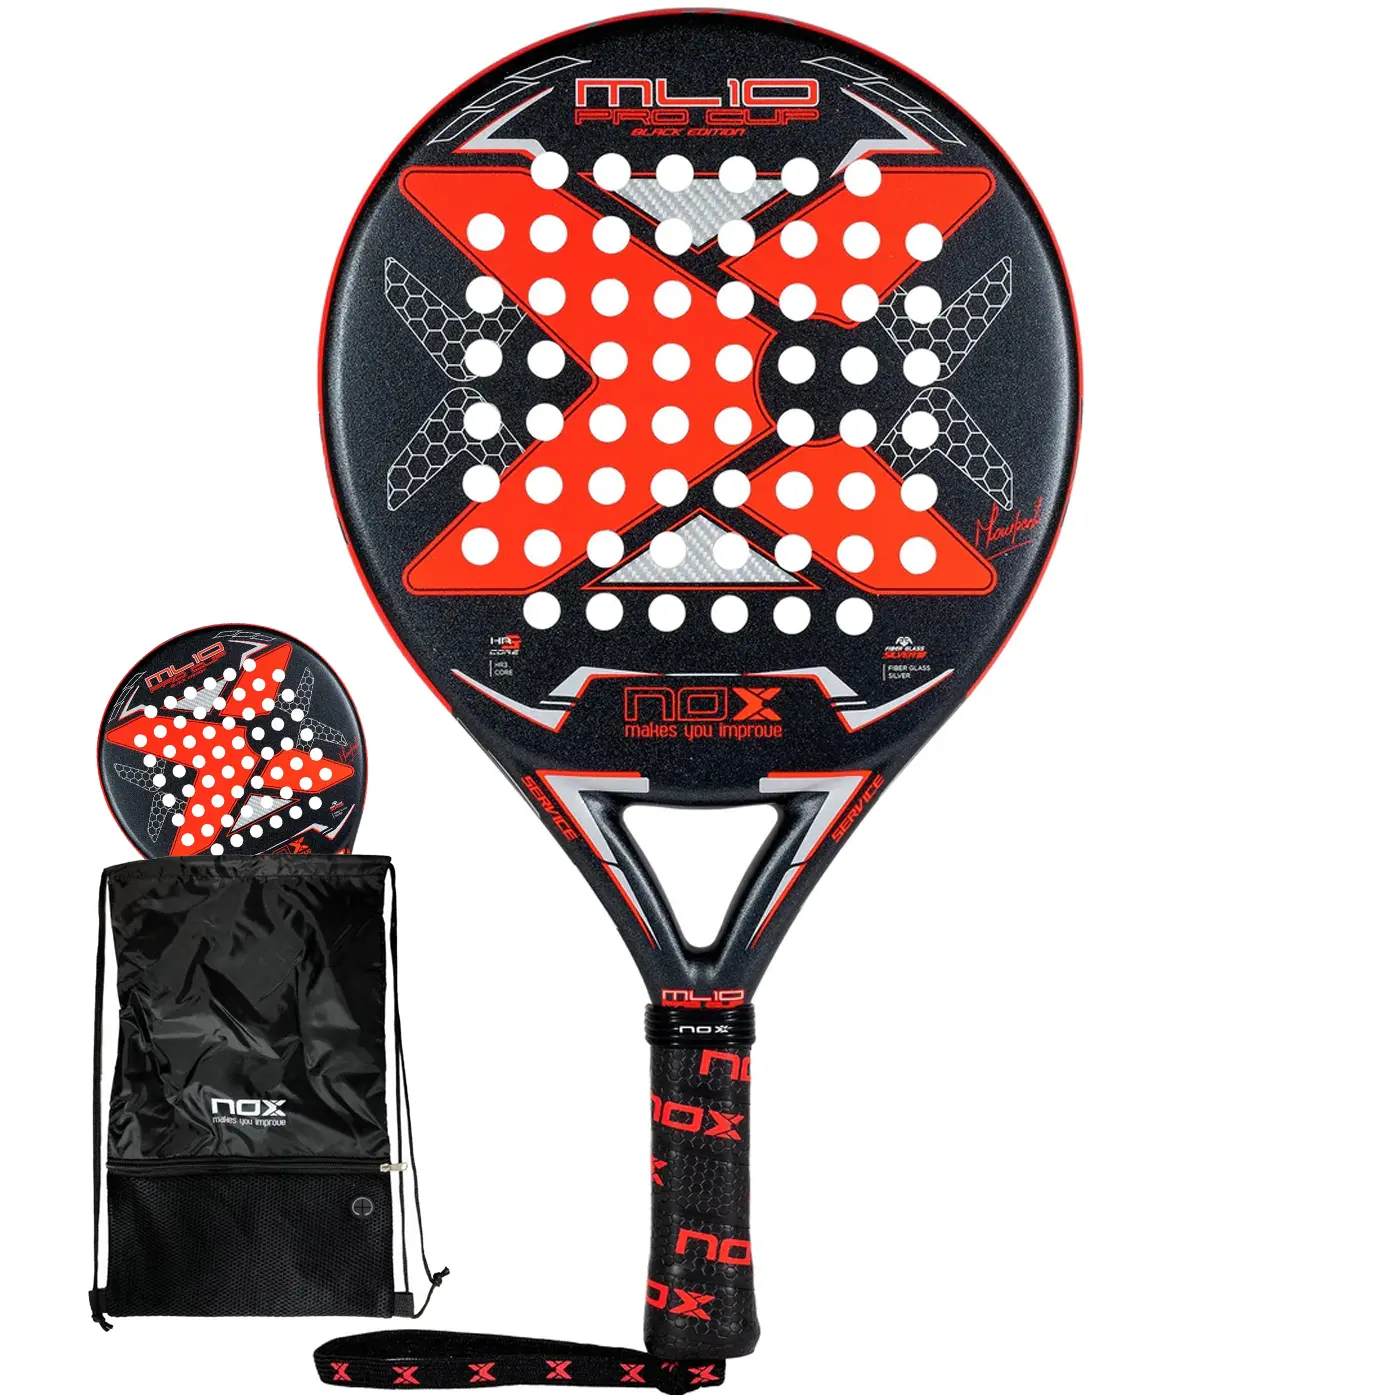 NOX ML10 PRO CUP BLACK EDITION ARENA Padel Racket 2023 racket with cover bag Image 1